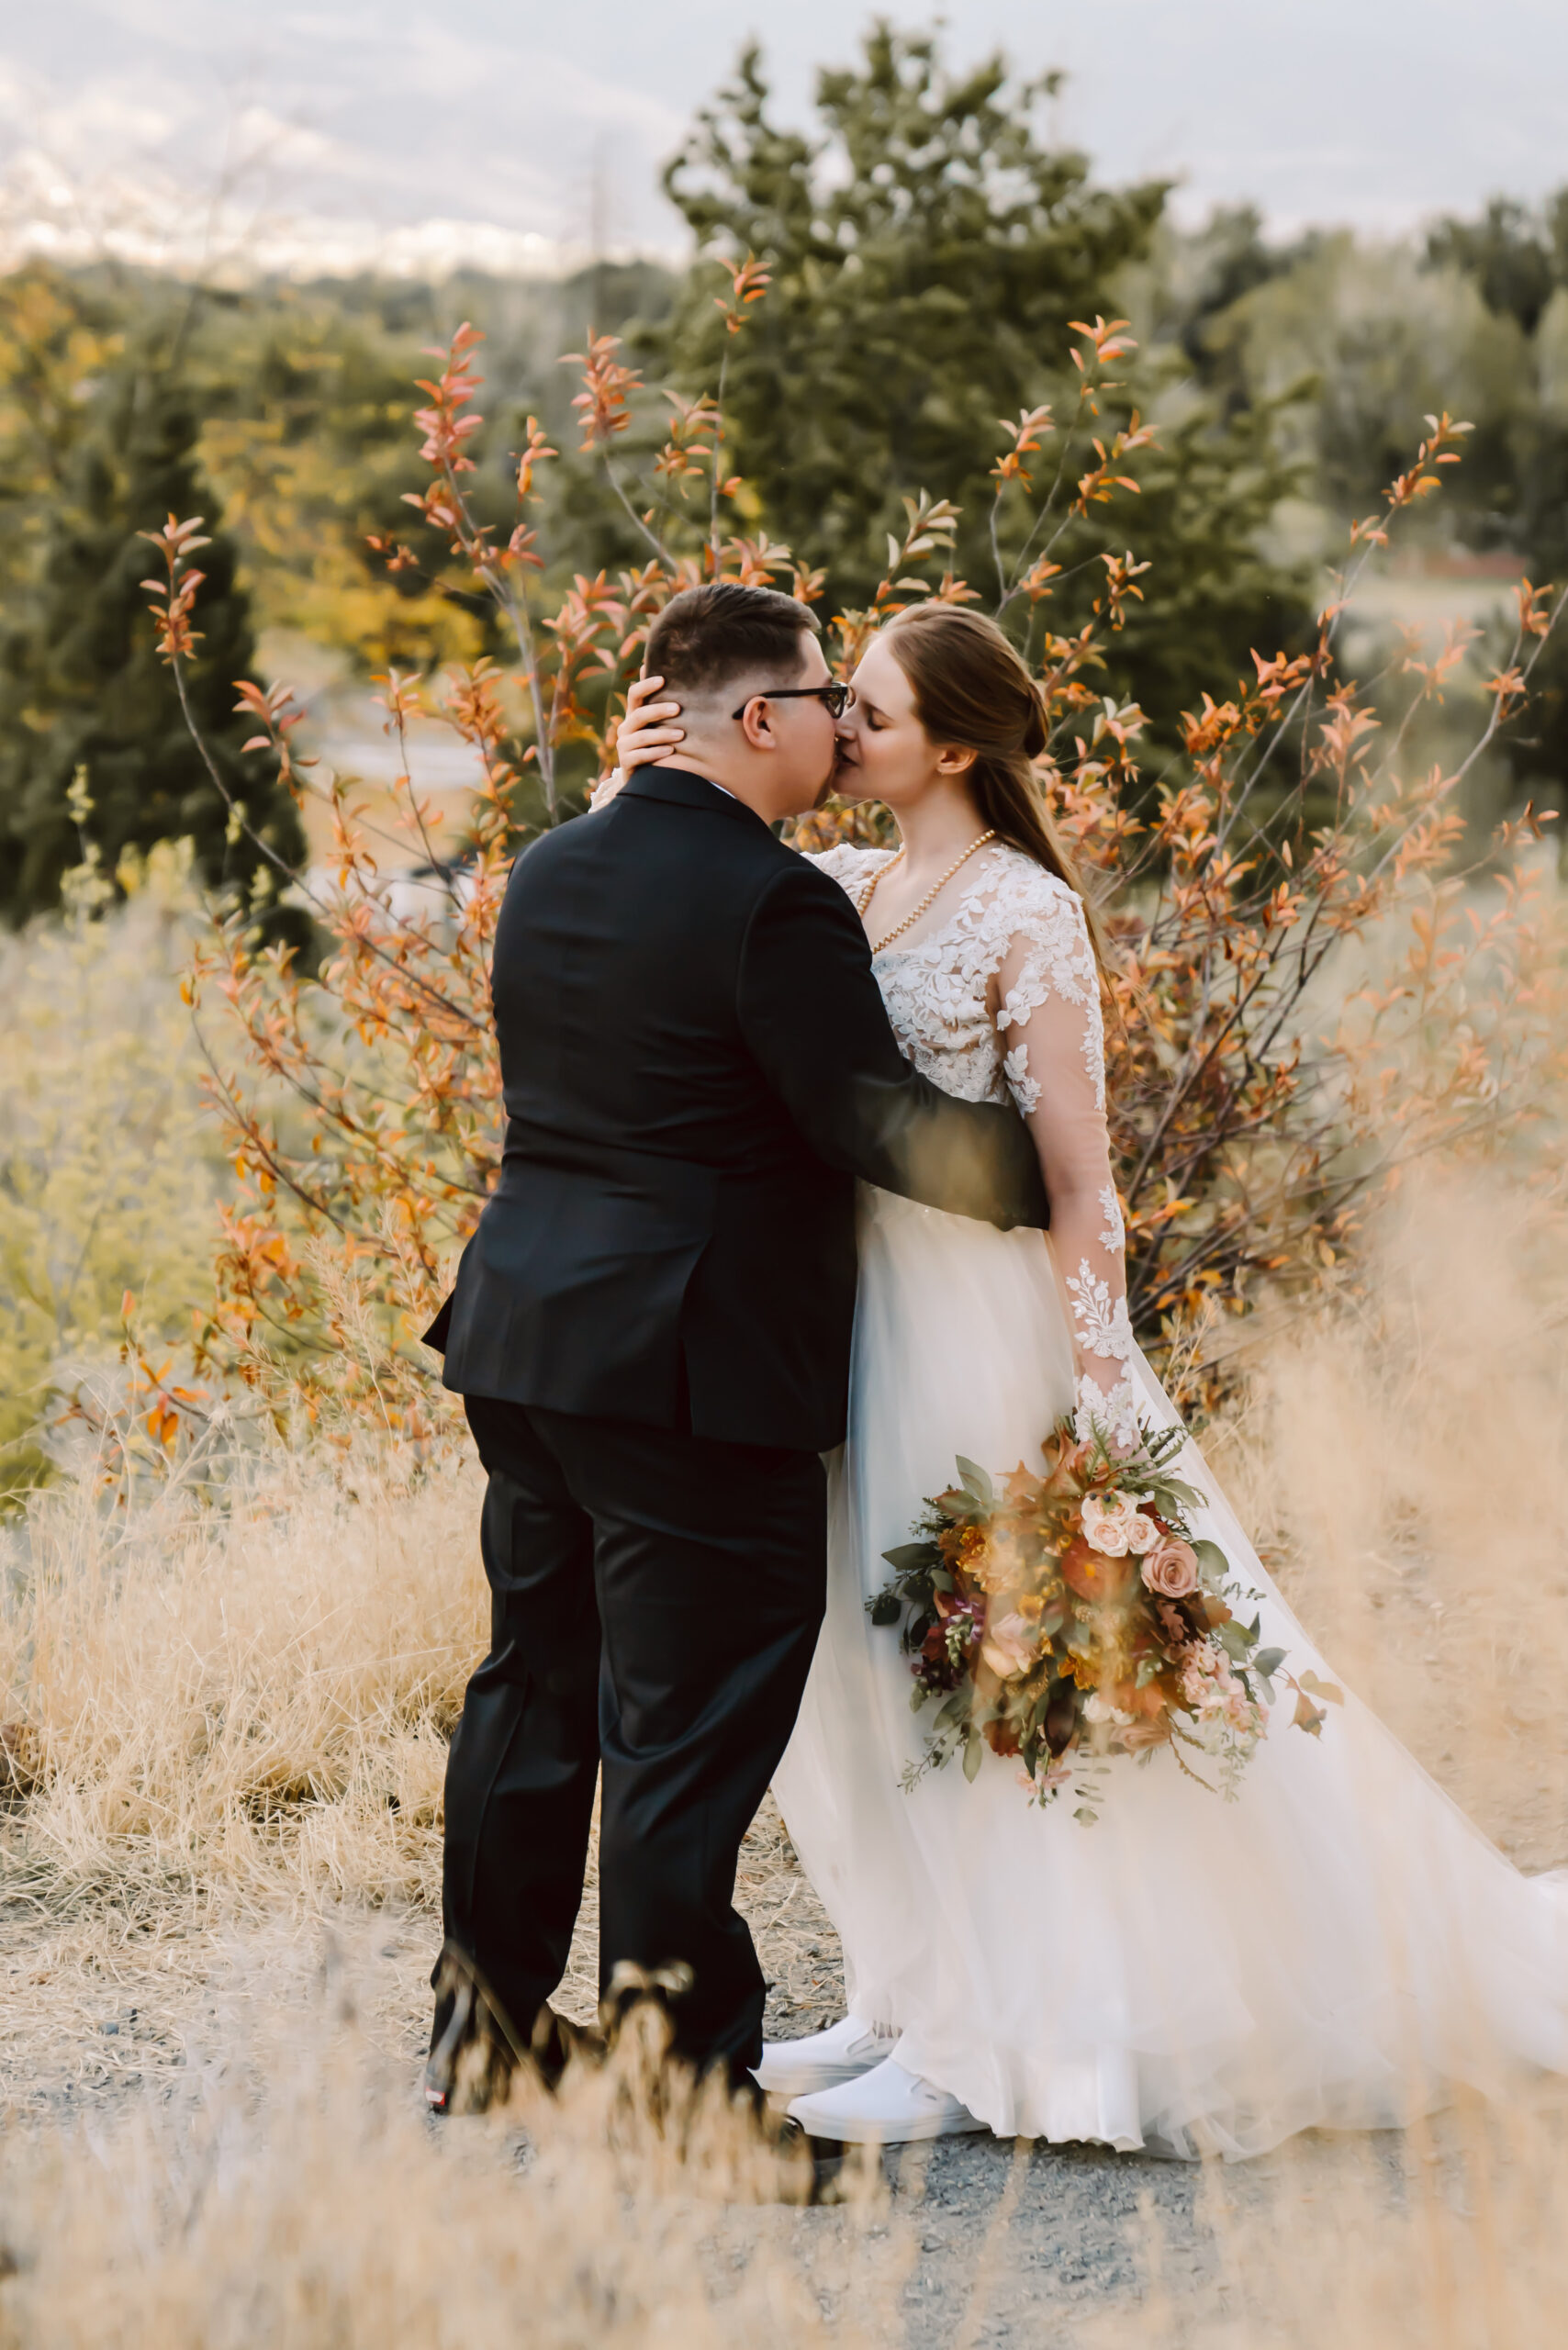 a bride and groom kissing in front of some fall colored leaves for their wedding day